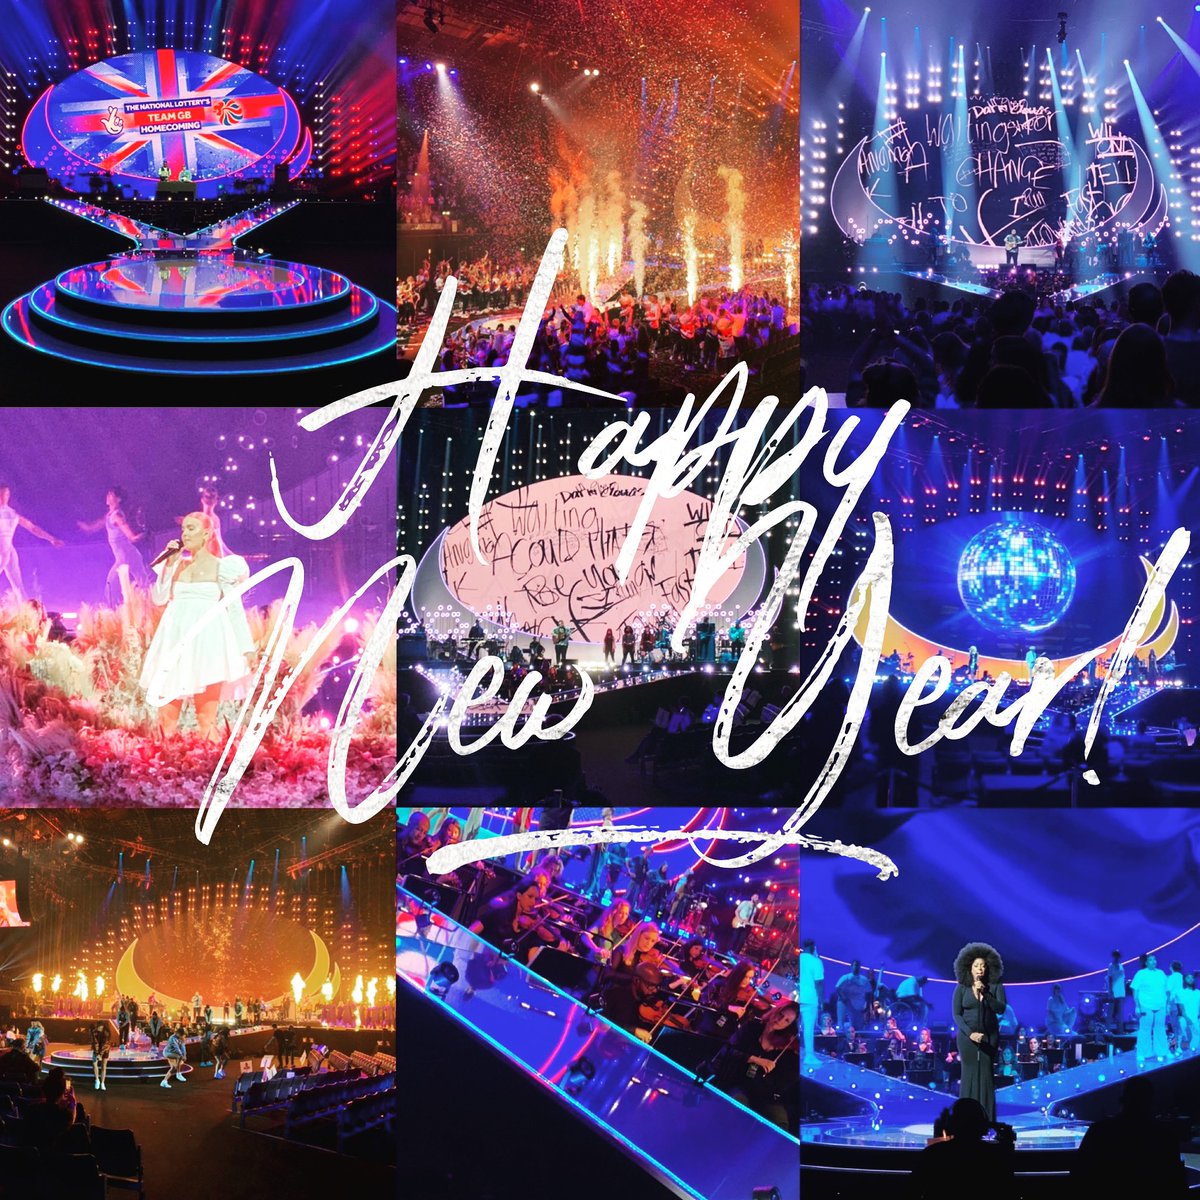 Wishing all our clients, colleagues and friends a fantastic New Year! May it be full of fun, great creative teamwork and more spectacular shows 🎉🥳⭐️✨✨✨ #happynewyear #fun #creatingthespectacular #teamwork #creativity #rockartdesign #cheersto2022